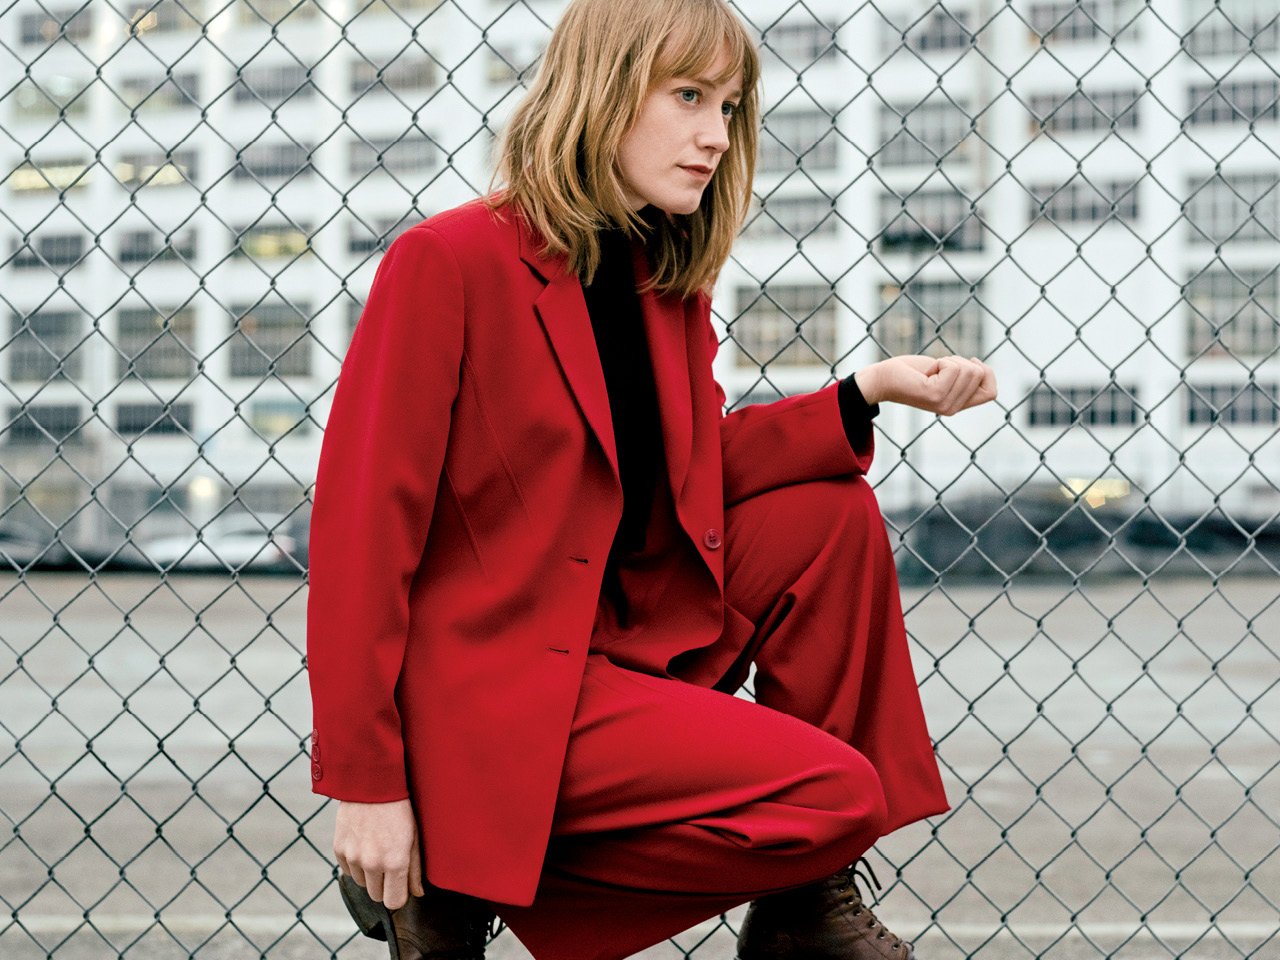 the Weather Station (a.k.a. Toronto’s Tamara Lindeman, in a red suit and black shirt